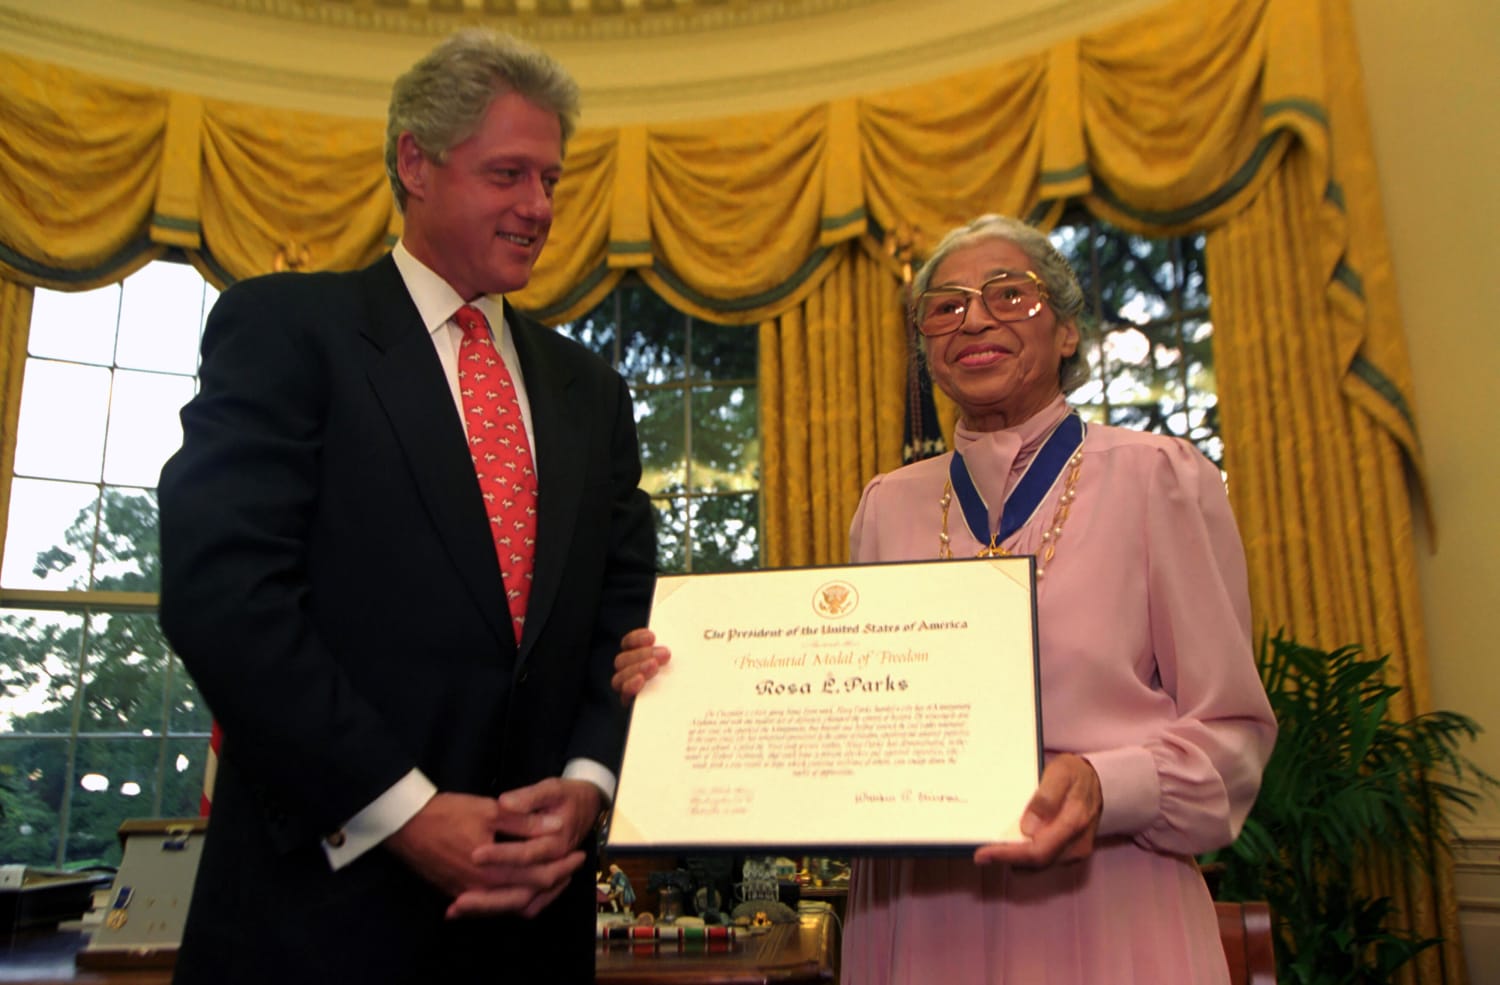 President Bill Clinton presents civil rights icon, Rosa Parks with the Presidential Medal of Freedom certificate in the Oval Office. 1996